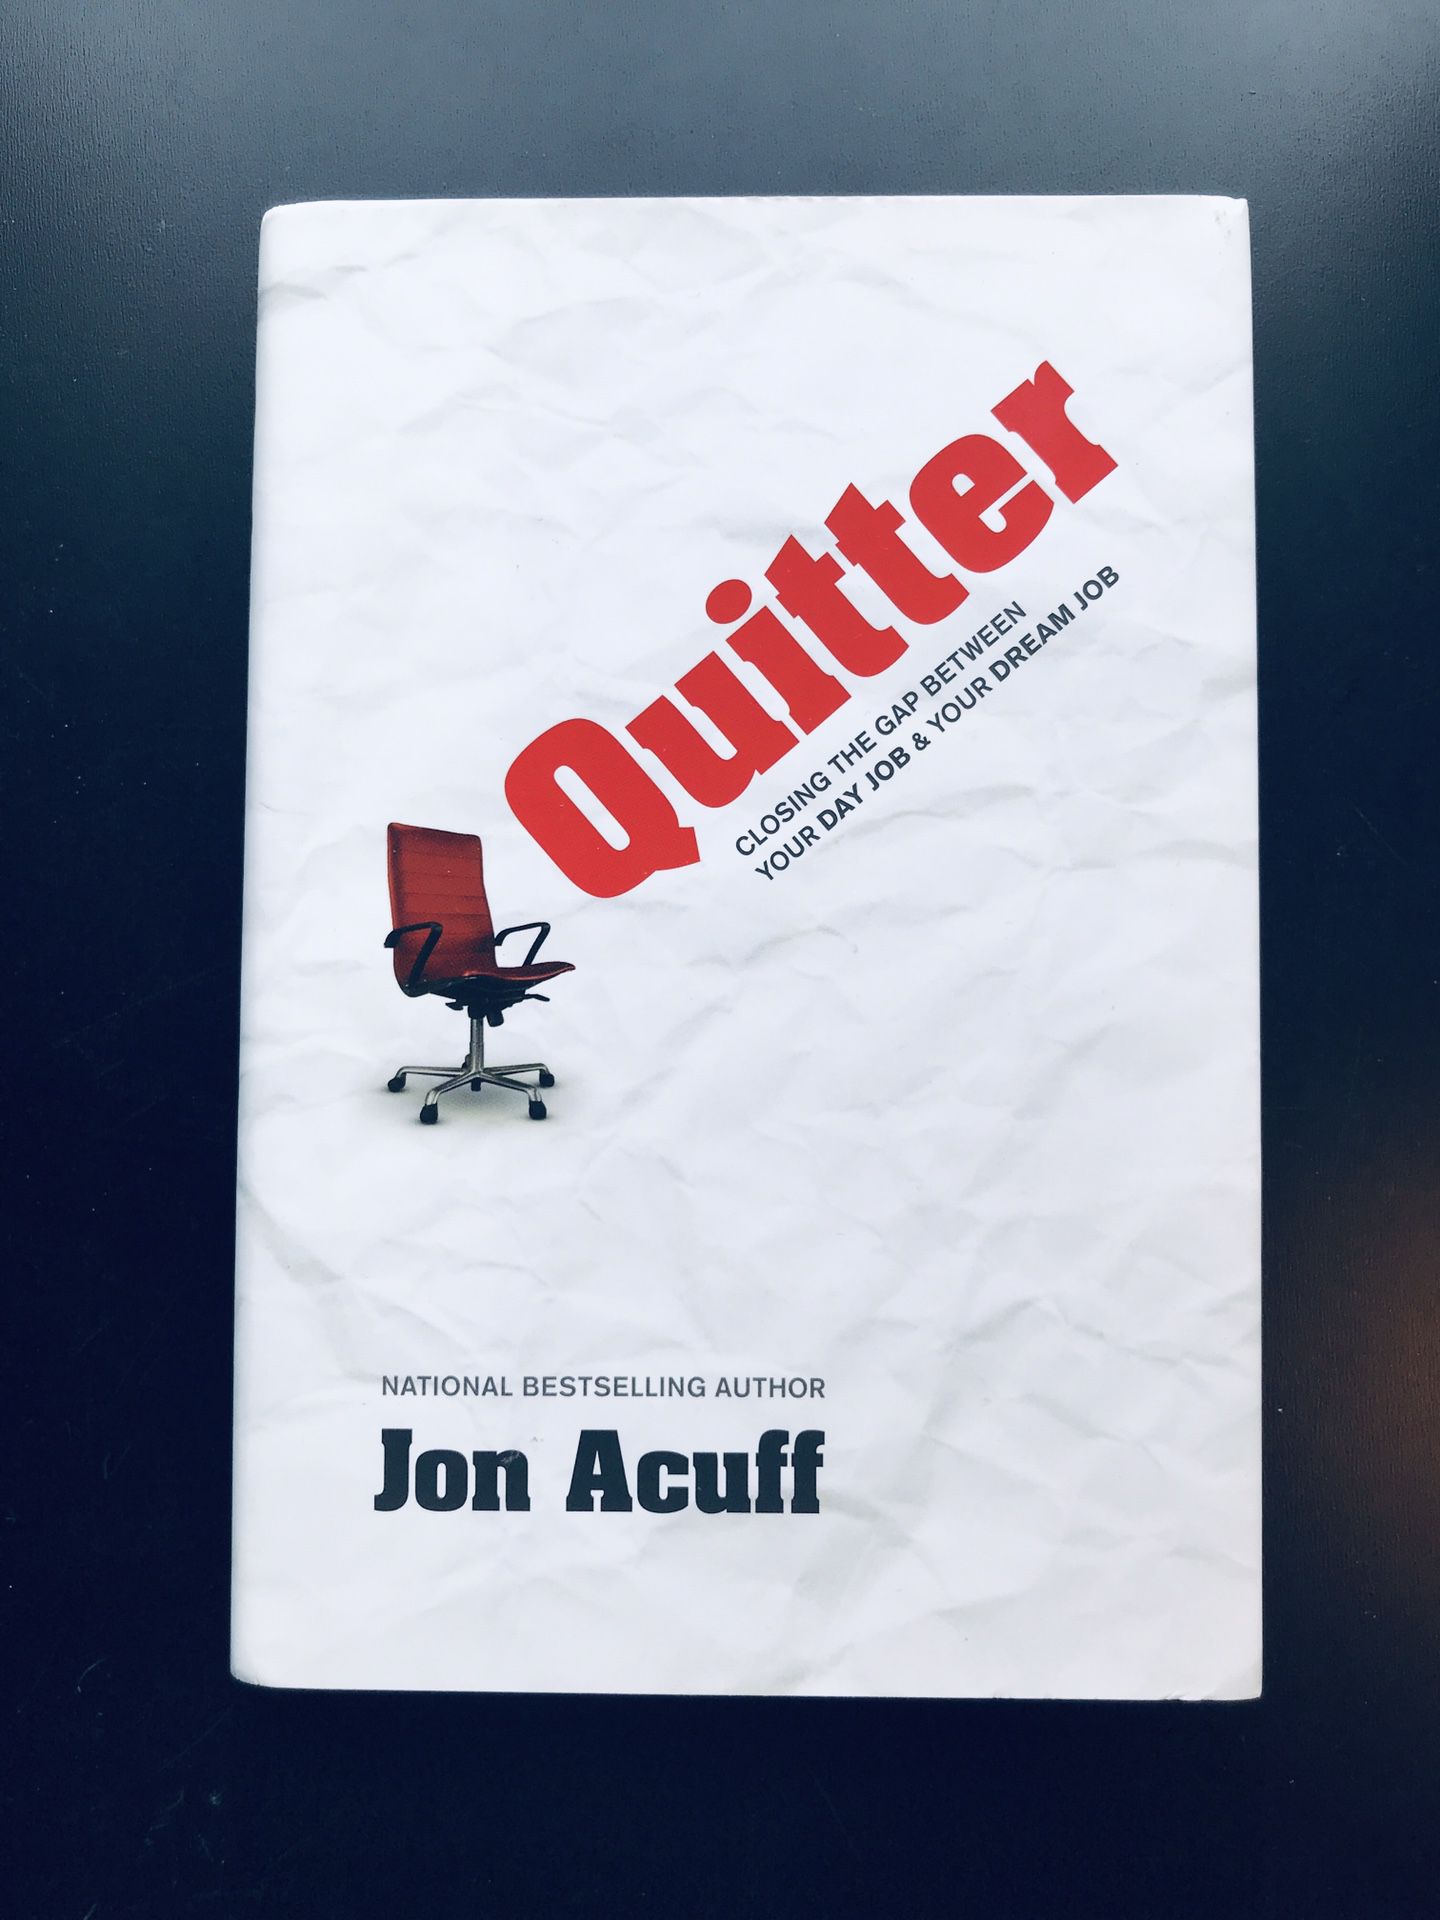 “Quitter: Closing the Gap Between Your Day Job & Your Dream Job” by Jon Acuff (Hardback) - *NEW*